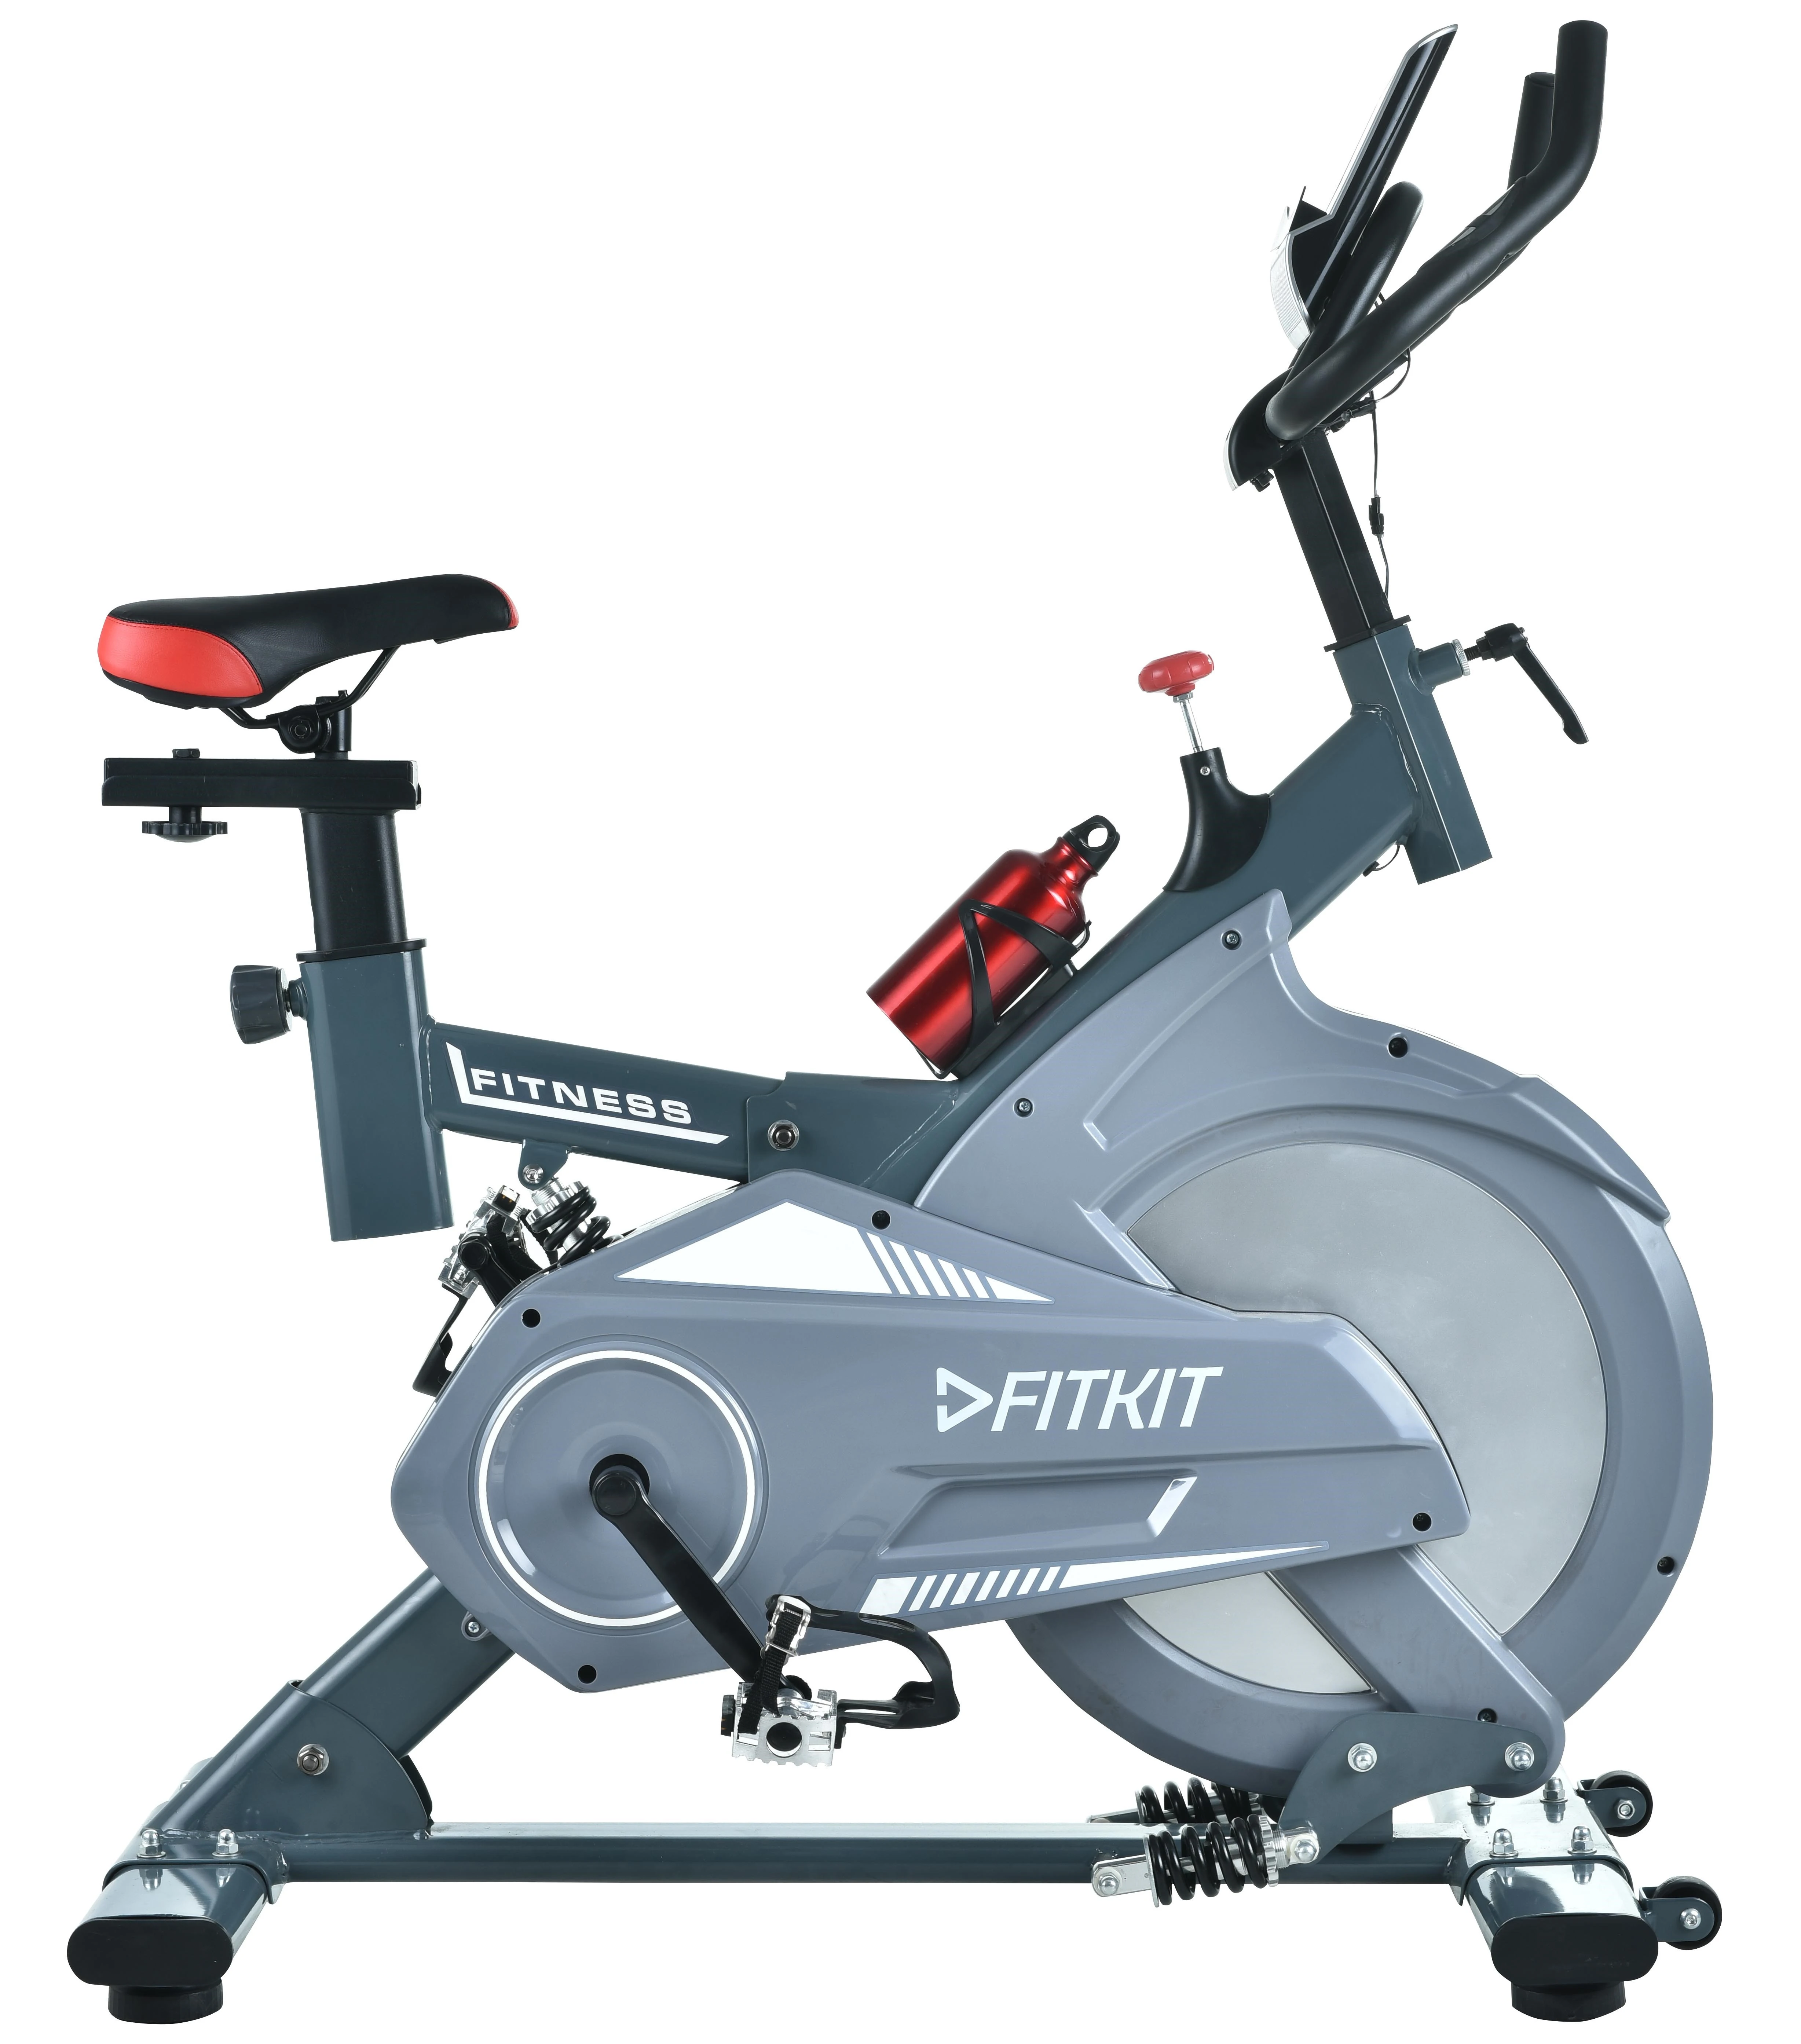 2021 New Products Spin Indoor Cycling Exercise Bike Fit Gym Fitness Equipment Professional Spinning Bike With Screen